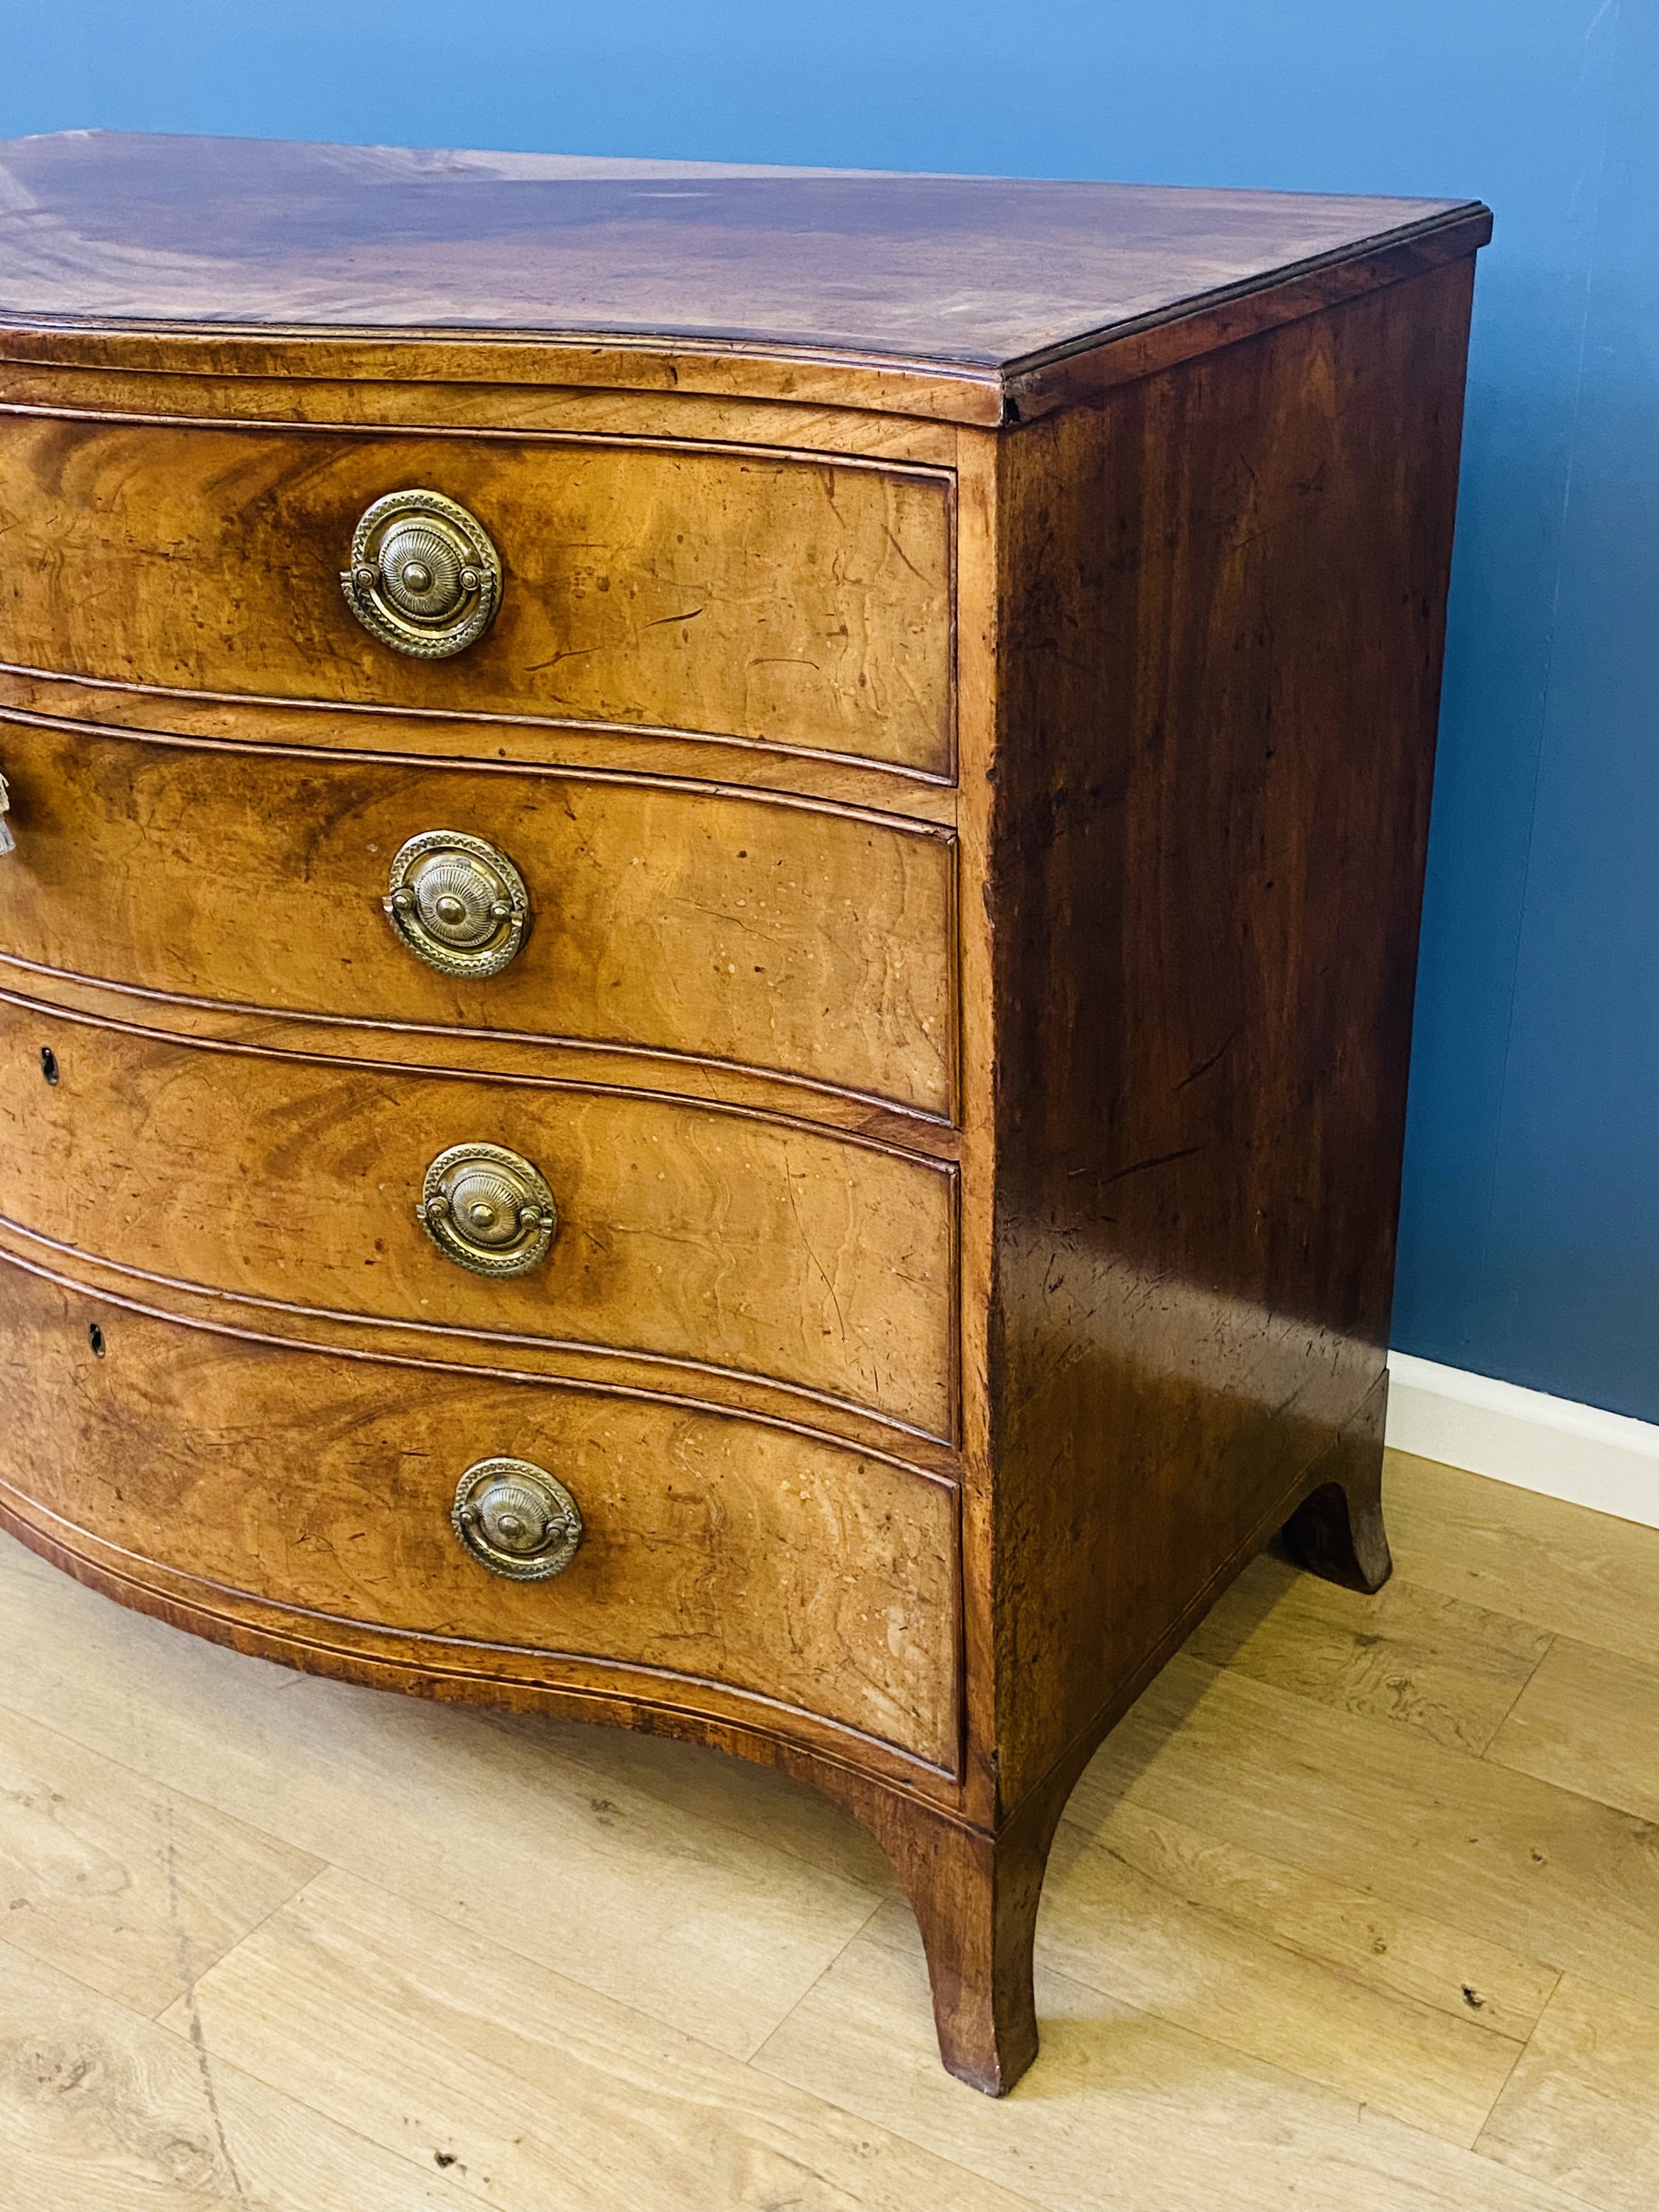 Regency mahogany chest of drawers - Image 6 of 8